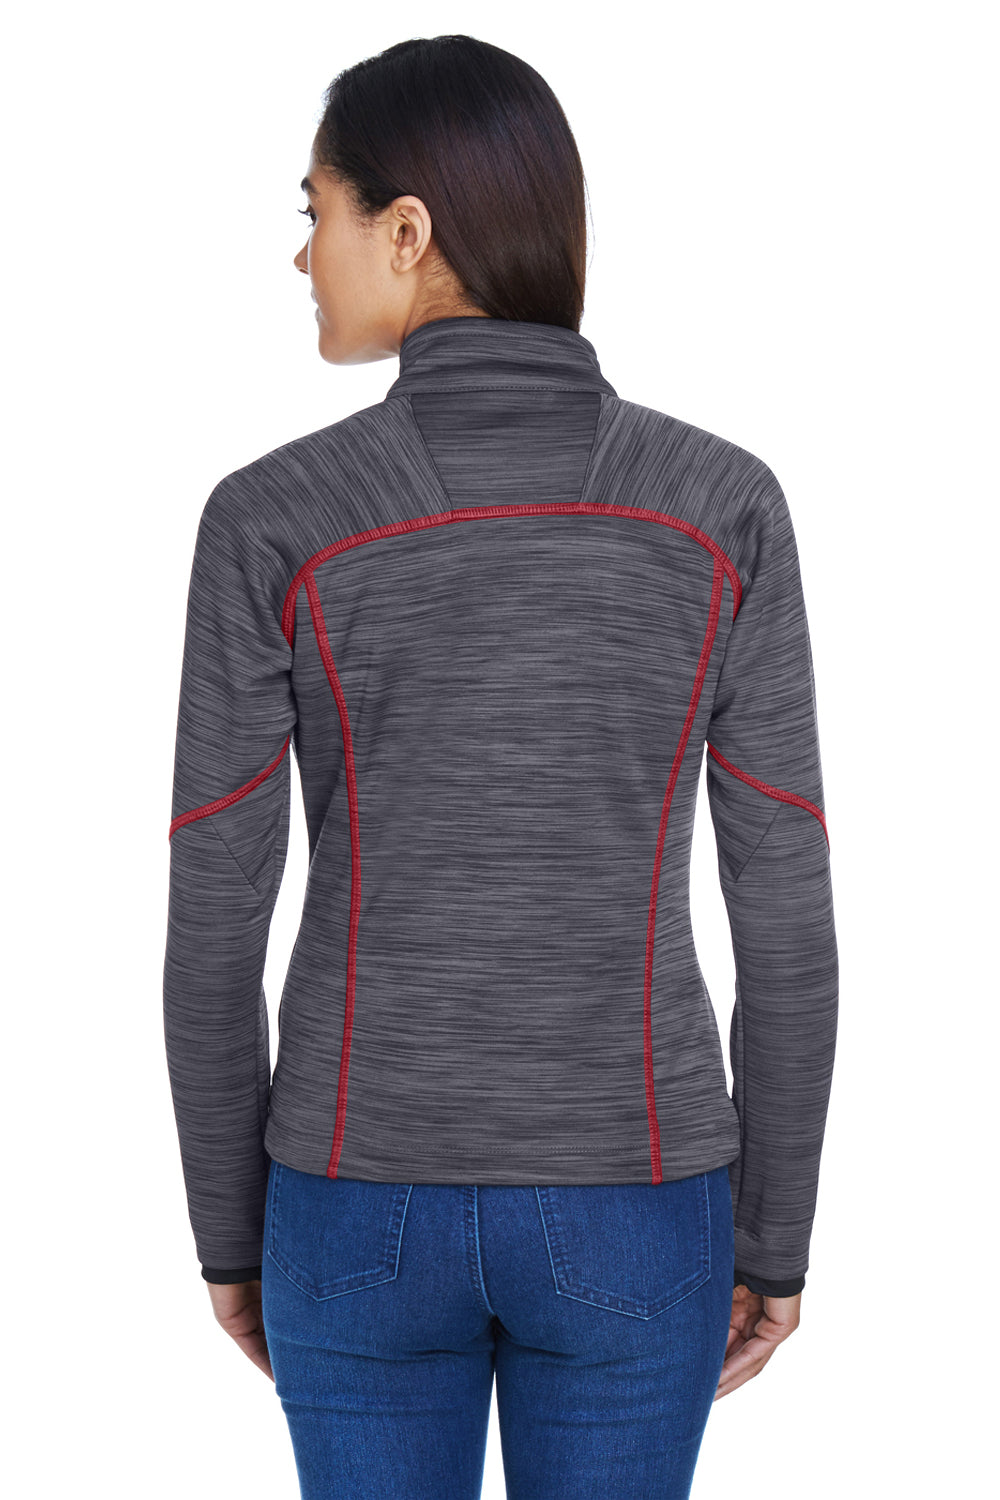 North End 78697 Womens Sport Red Flux Full Zip Jacket Carbon Grey/Red Back